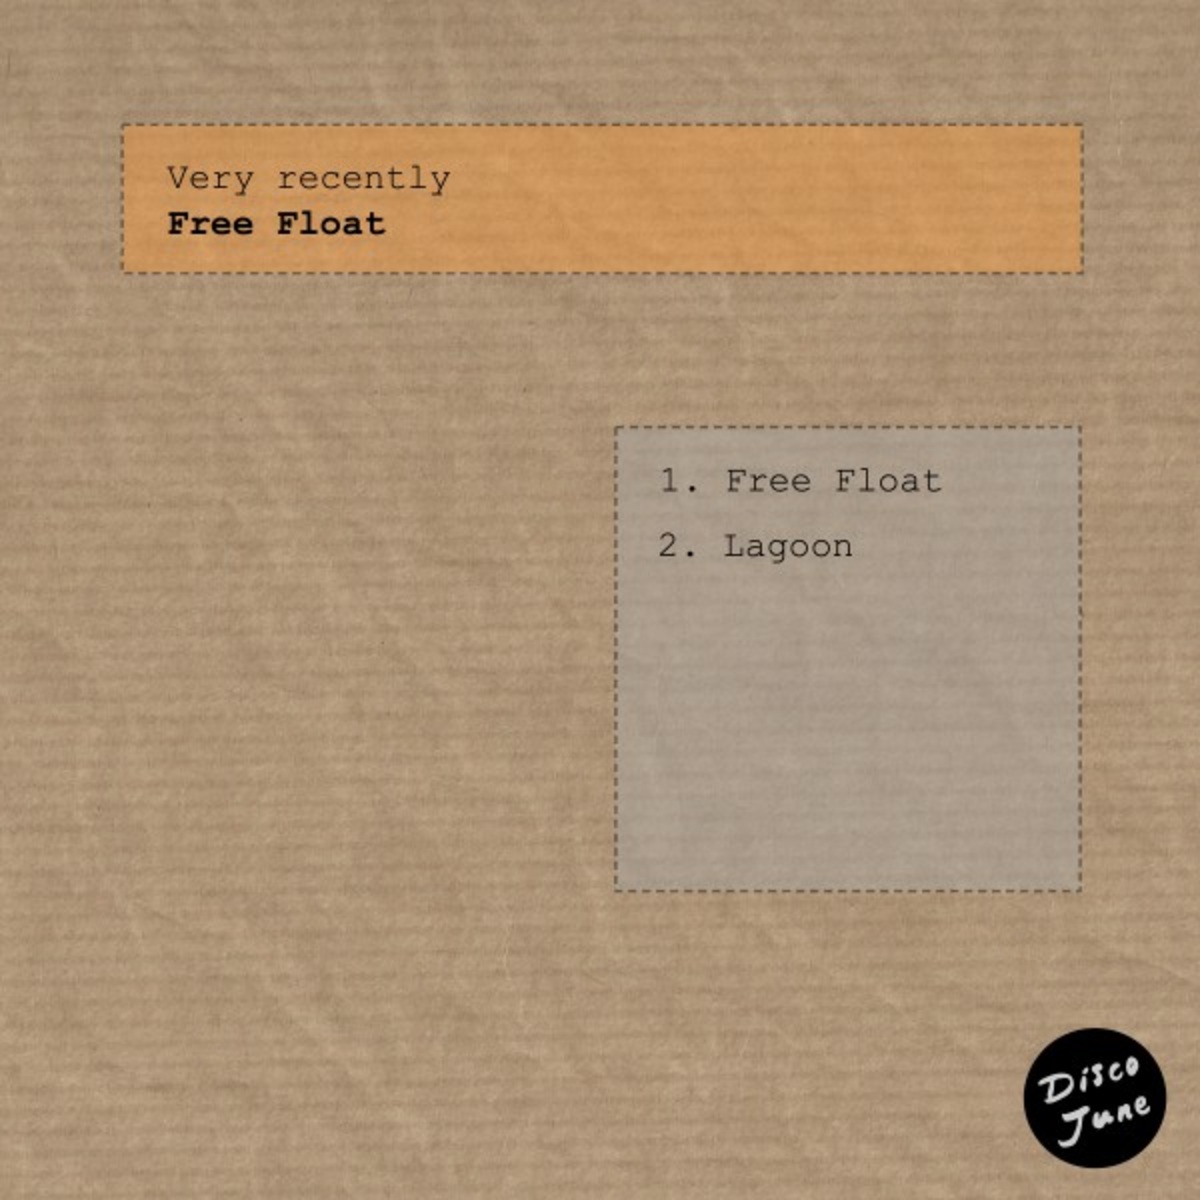 Very recently - Free Float / Disco June